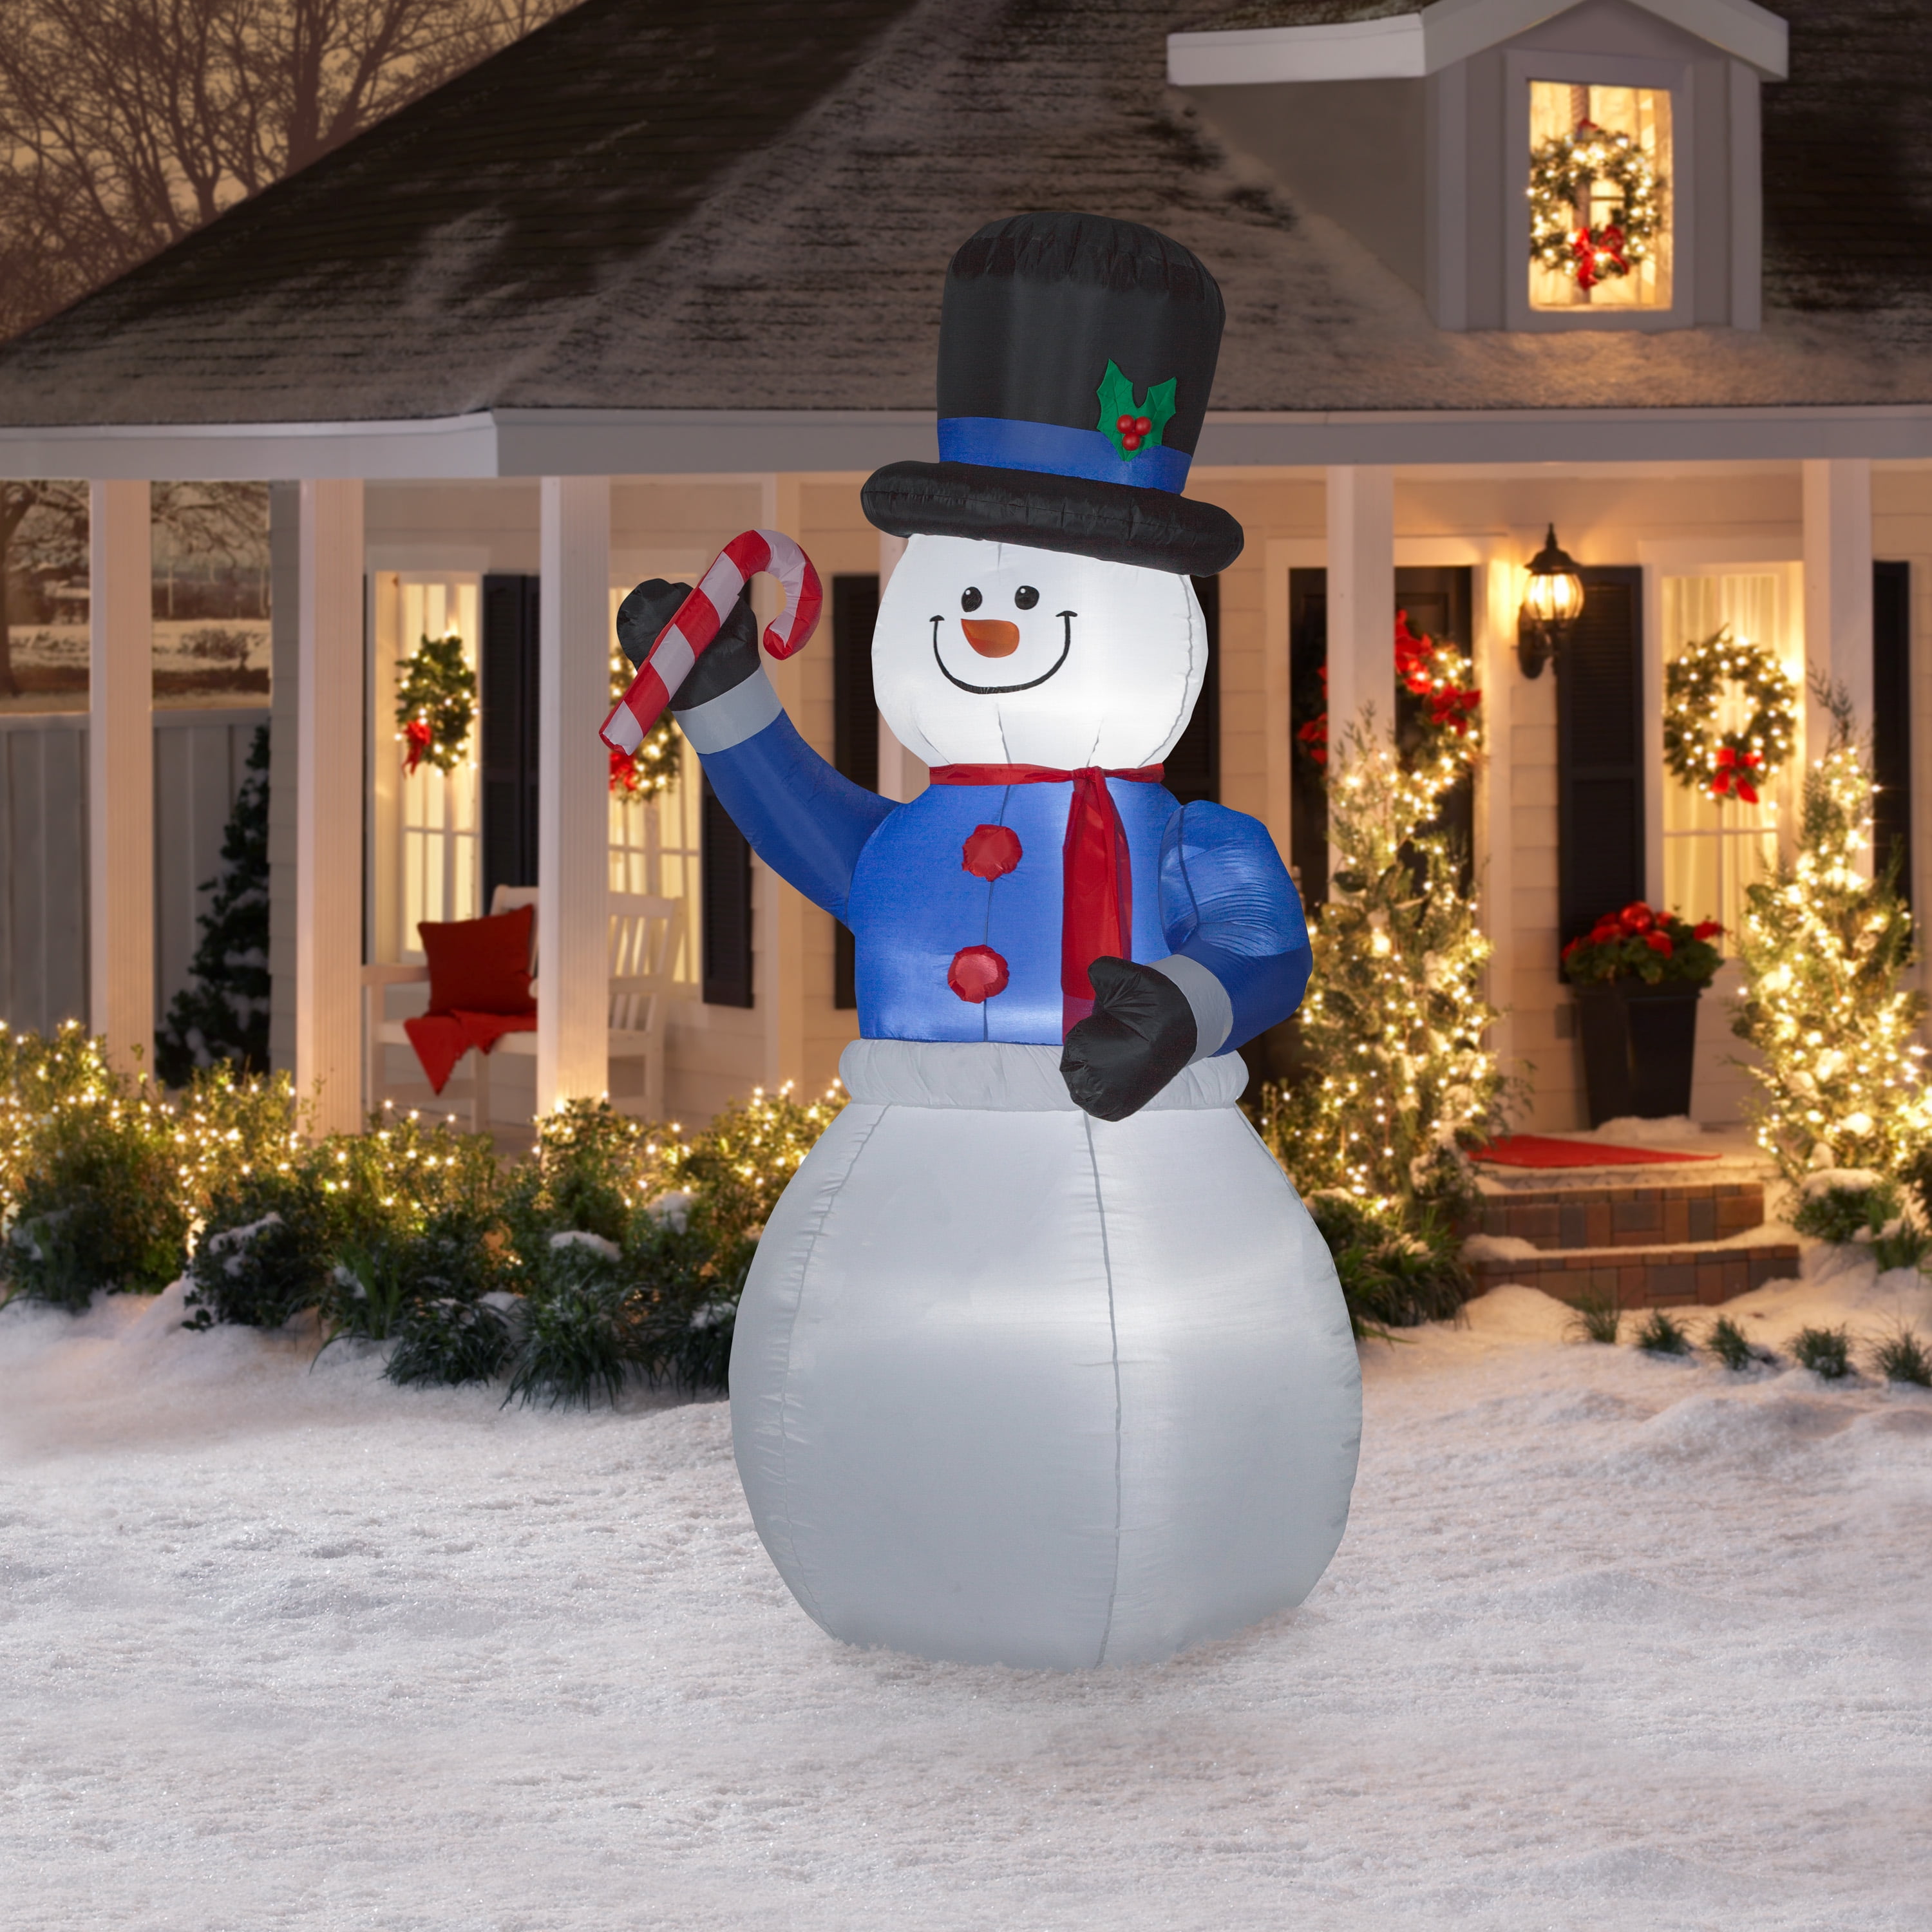 Christmas Inflatable Decoration Outdoor & Indoor 5 FT, Snowman Inflatab...